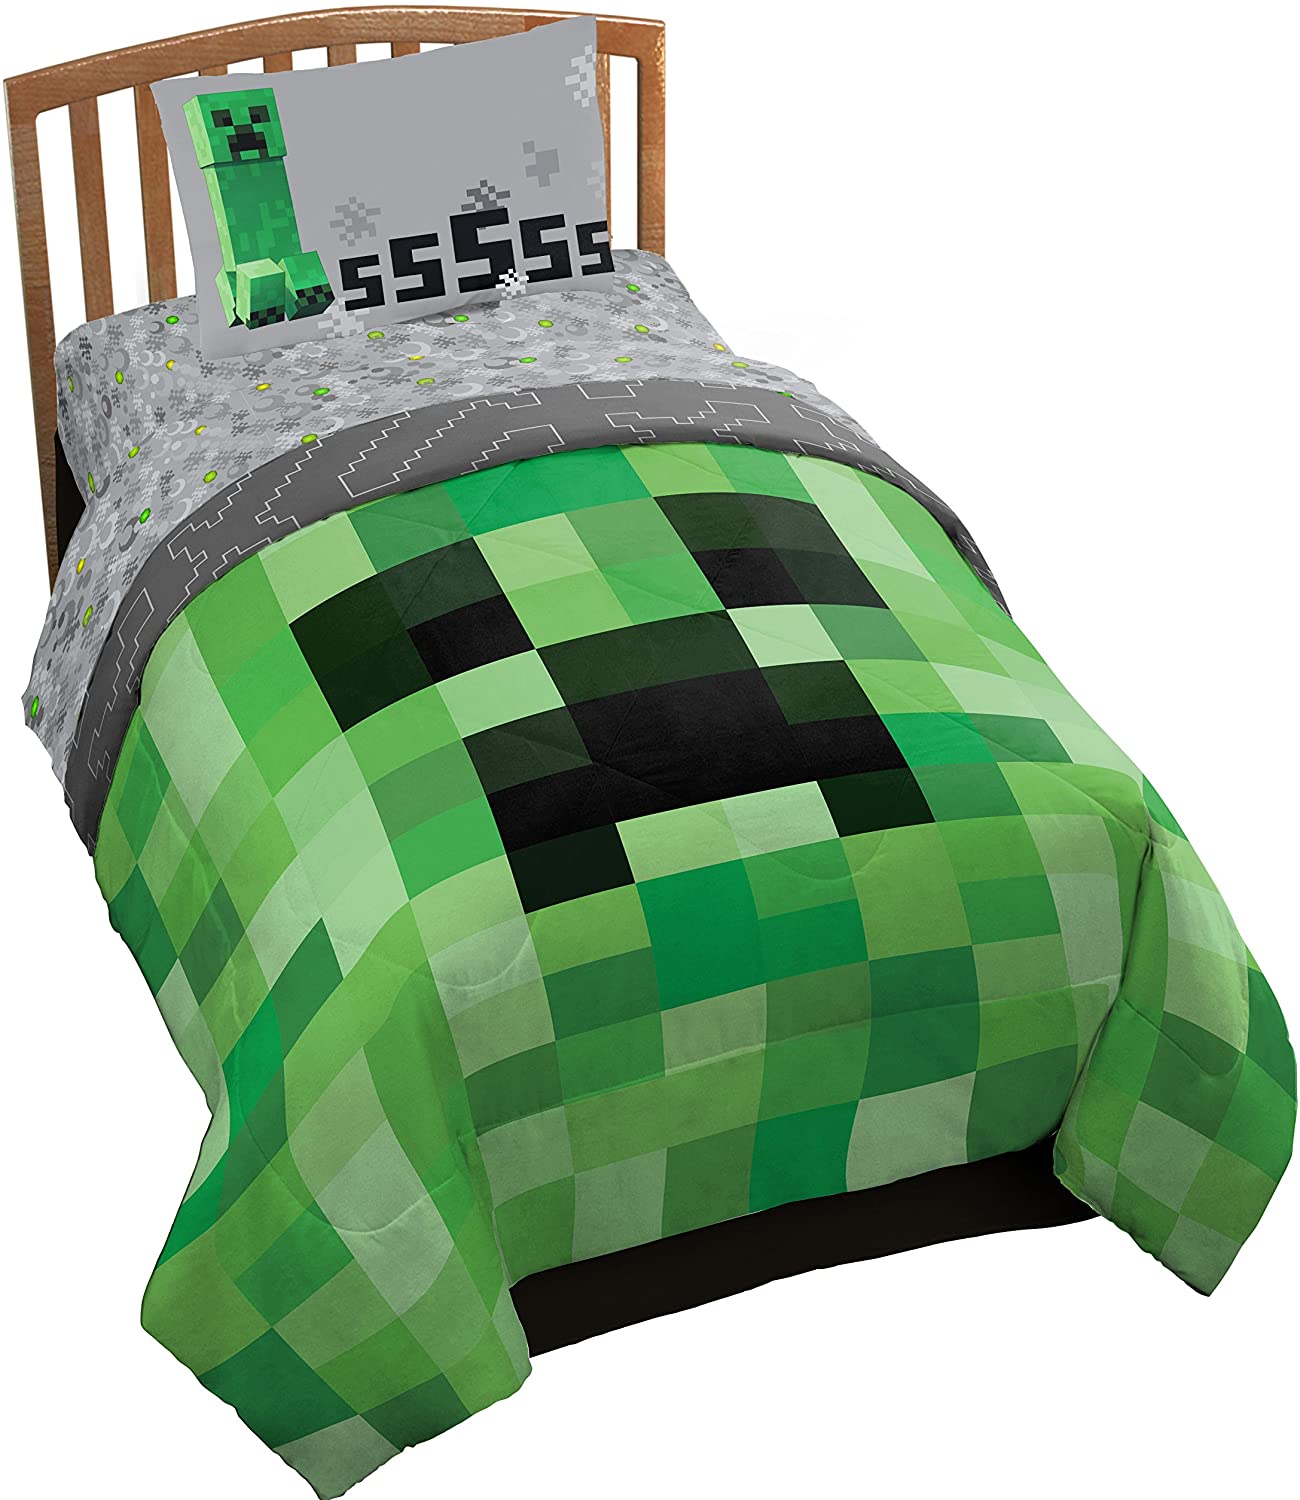 Minecraft Creeper Twin Bed Set Reco Image